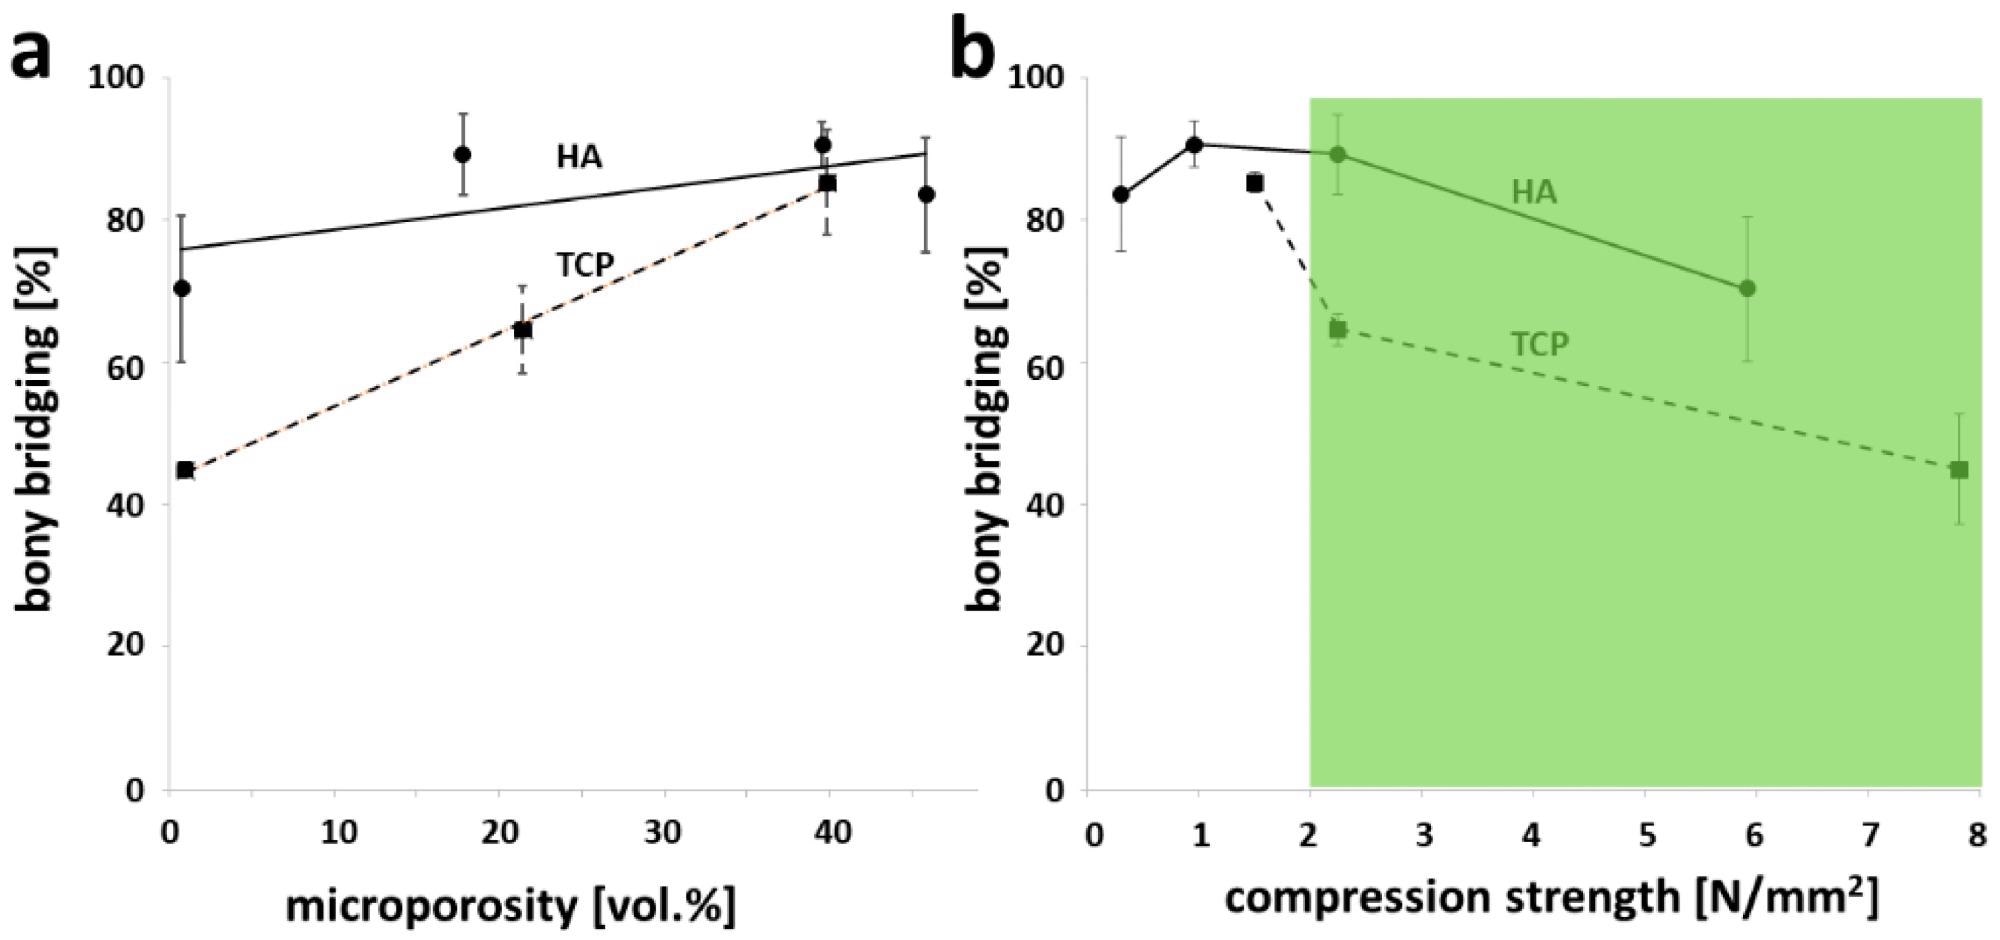 Comparison of osteoconductivity in relation to microporosity and compression strength between otherwise identical HA- and TCP-based scaffolds. The results for TCP-based scaffolds produced with the identical stl-file were generated and reported earlier [10]. (a) Osteoconductivity related to microporosity of test samples; (b) osteoconductivity related to compression strength of the partially sintered scaffolds. The values are displayed as mean ± standard deviation. The range for cancellous bone (2–12 N/mm2) depicted in the green shaded area was taken from [34].